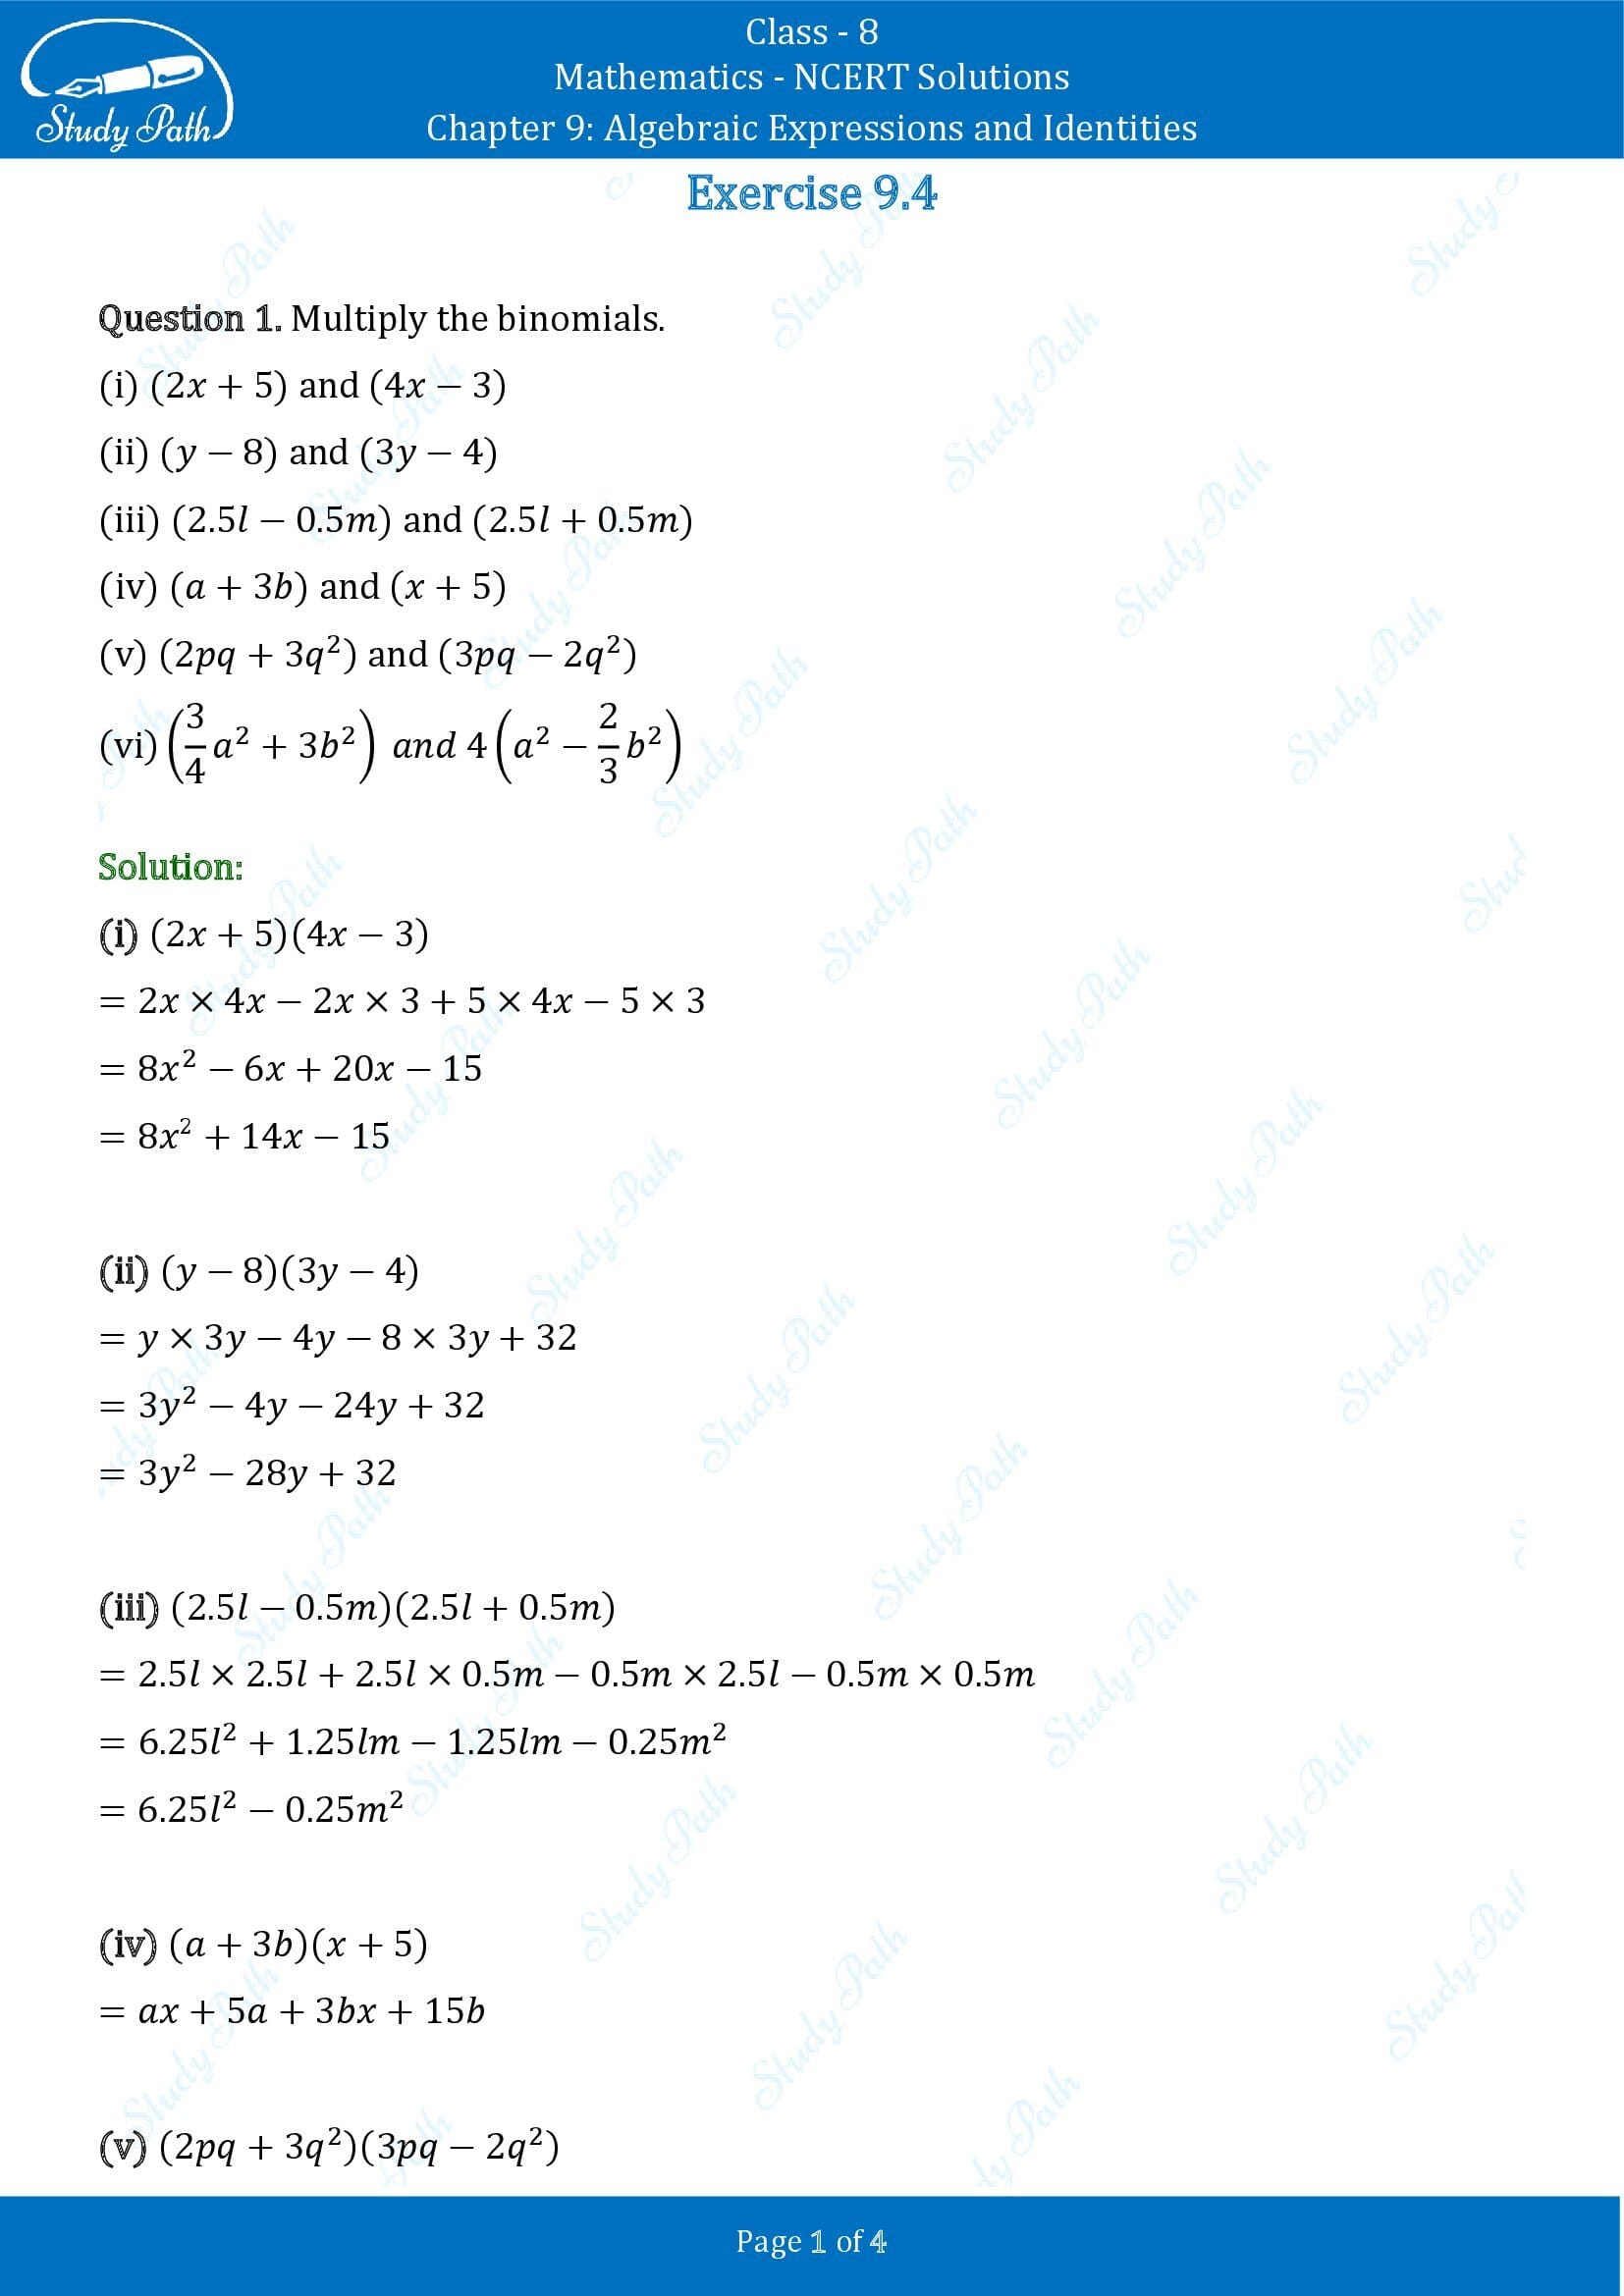 NCERT Solutions for Class 8 Maths Chapter 9 Algebraic Expressions and Identities Exercise 9.4 00001